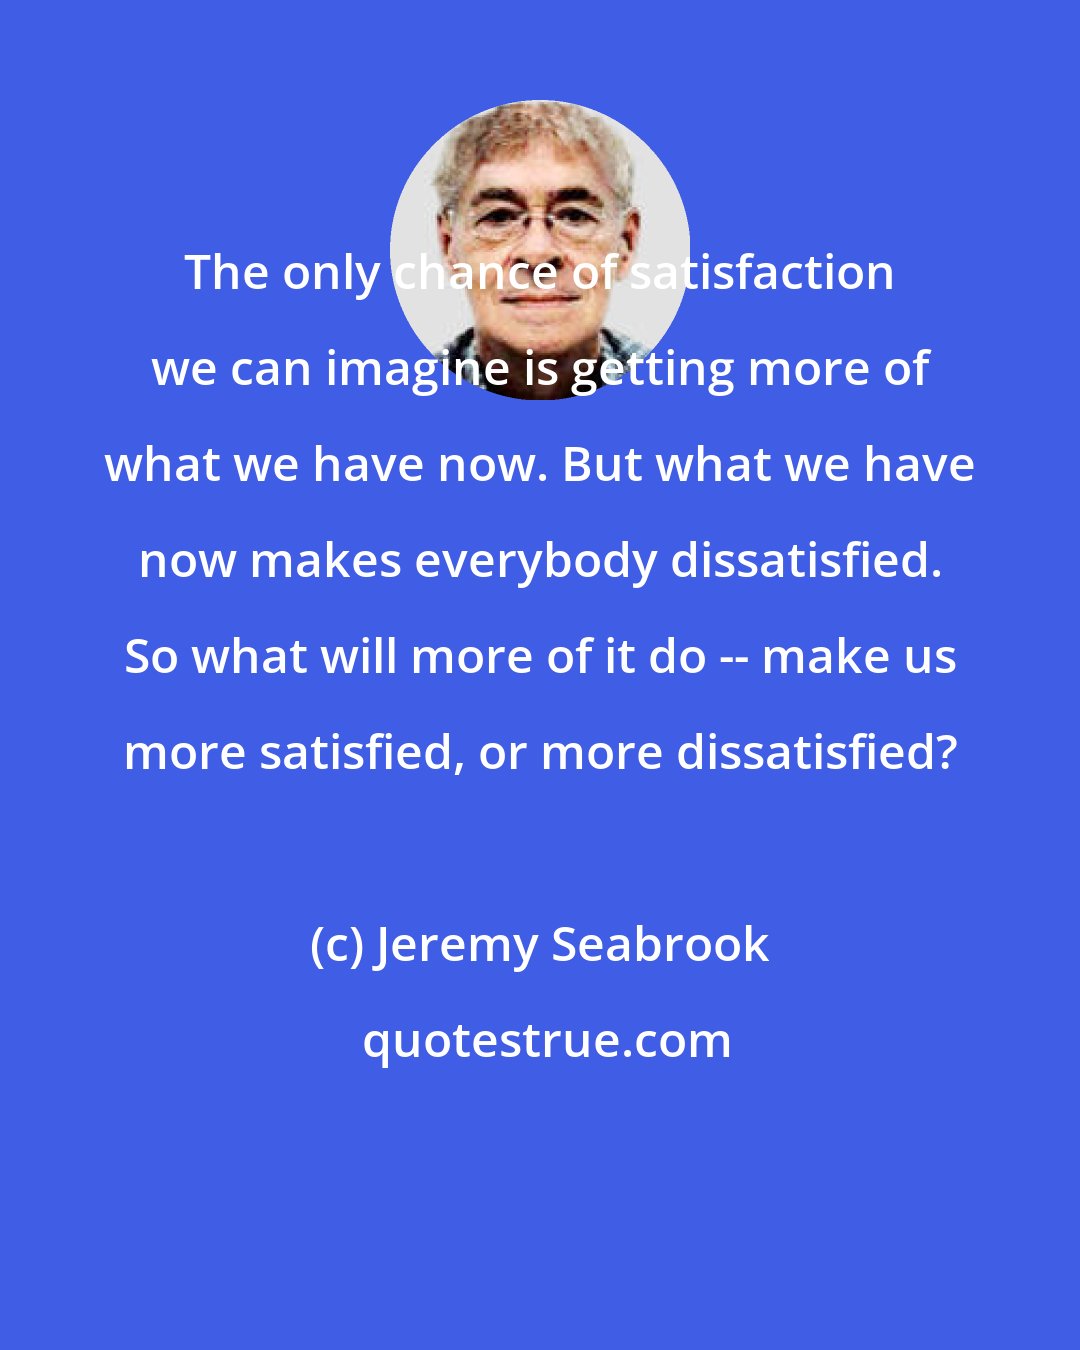 Jeremy Seabrook: The only chance of satisfaction we can imagine is getting more of what we have now. But what we have now makes everybody dissatisfied. So what will more of it do -- make us more satisfied, or more dissatisfied?